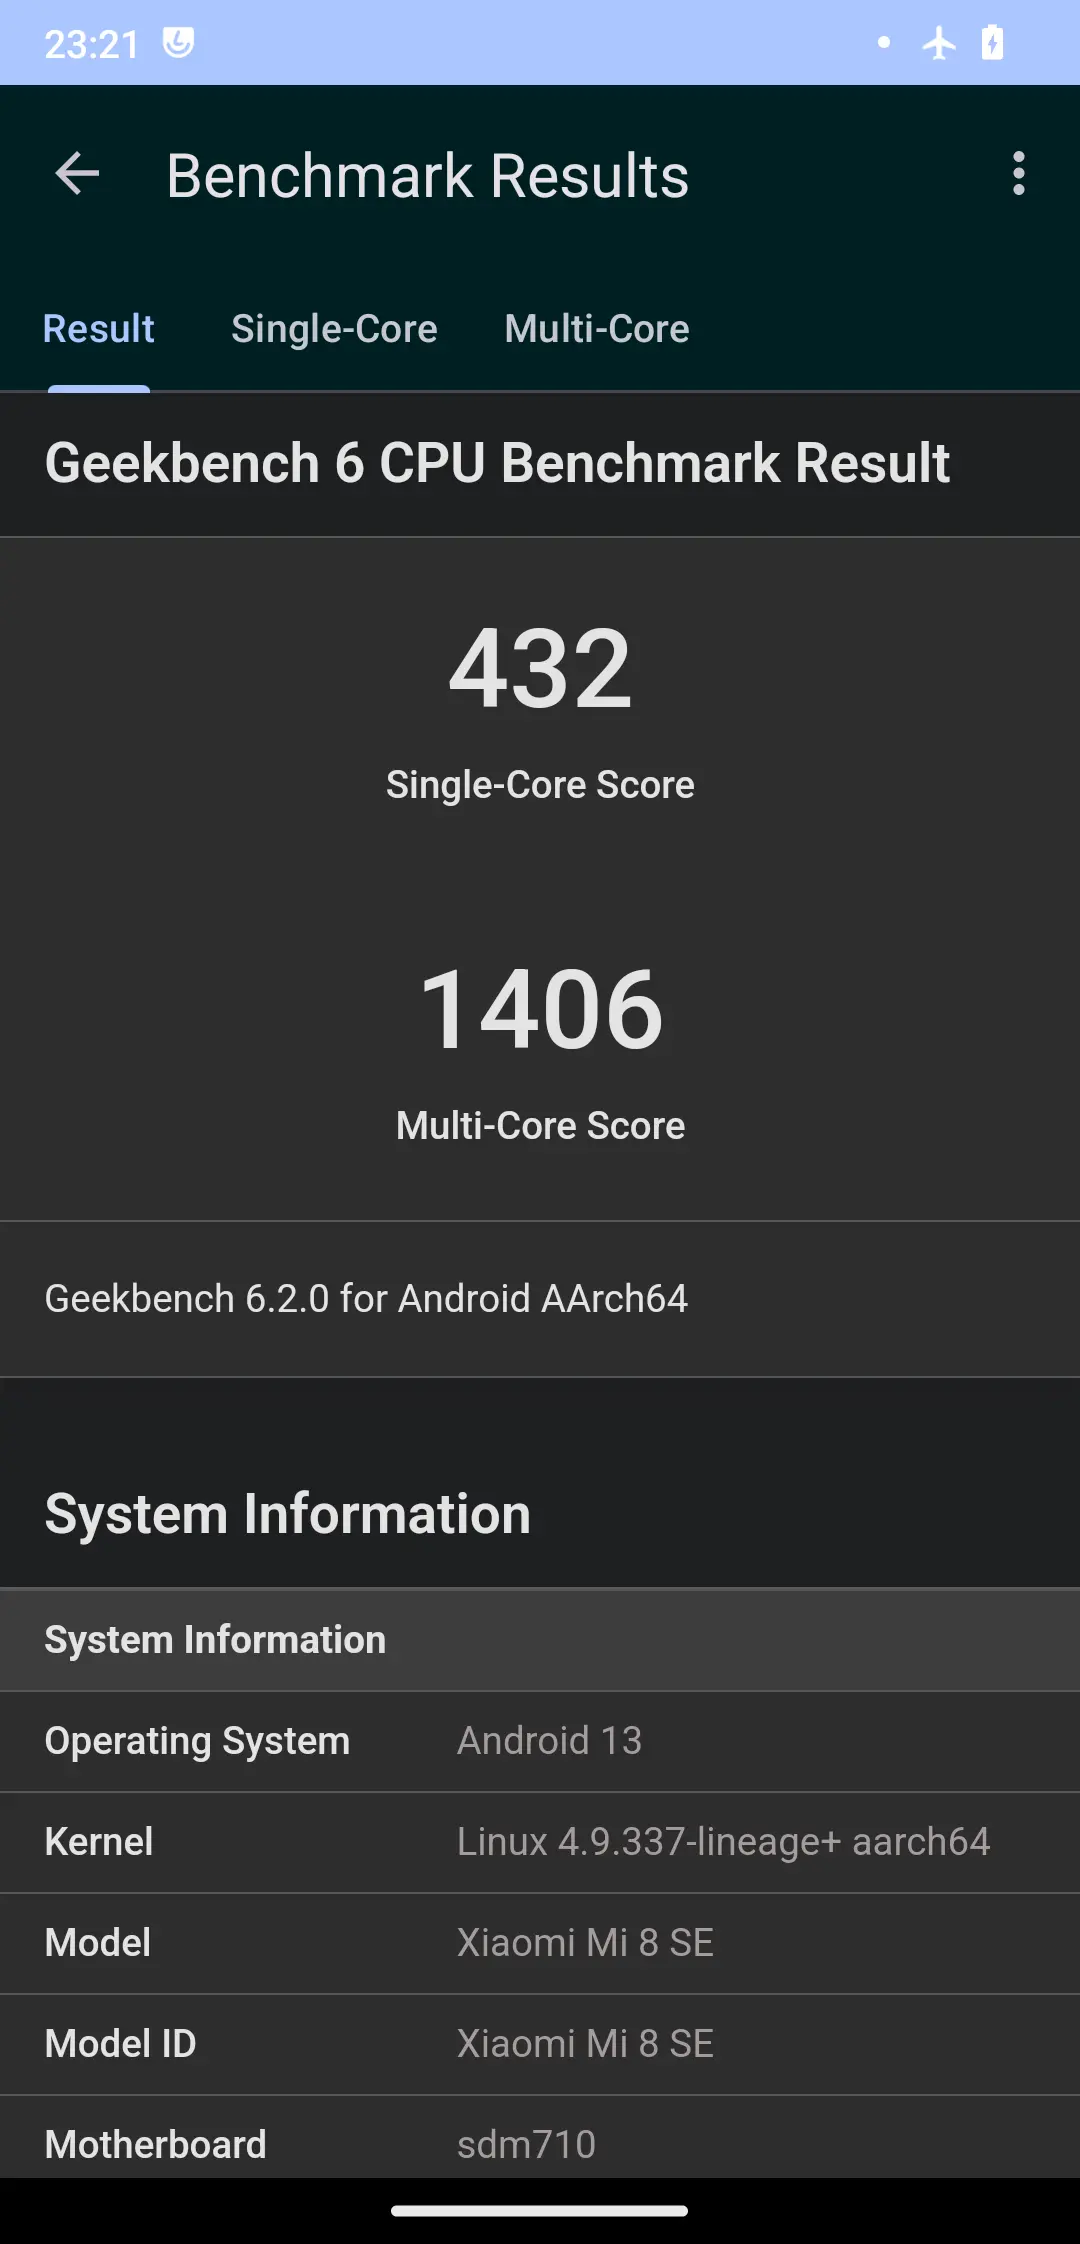 #~/img/android/lineage/8se-geekbench.webp